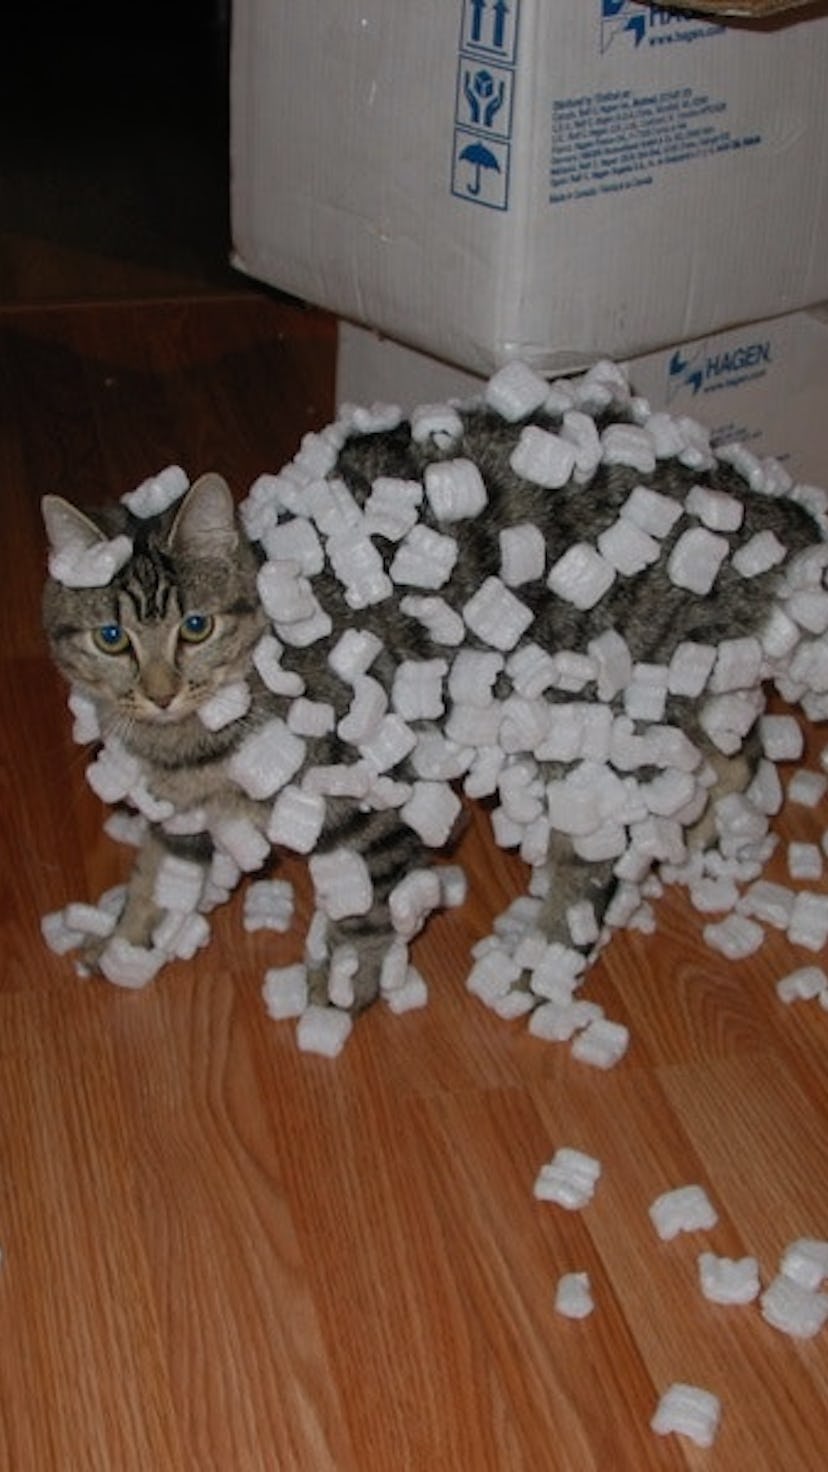 A tabby cat is pictured looking caught red-handed, covered in packing peanuts